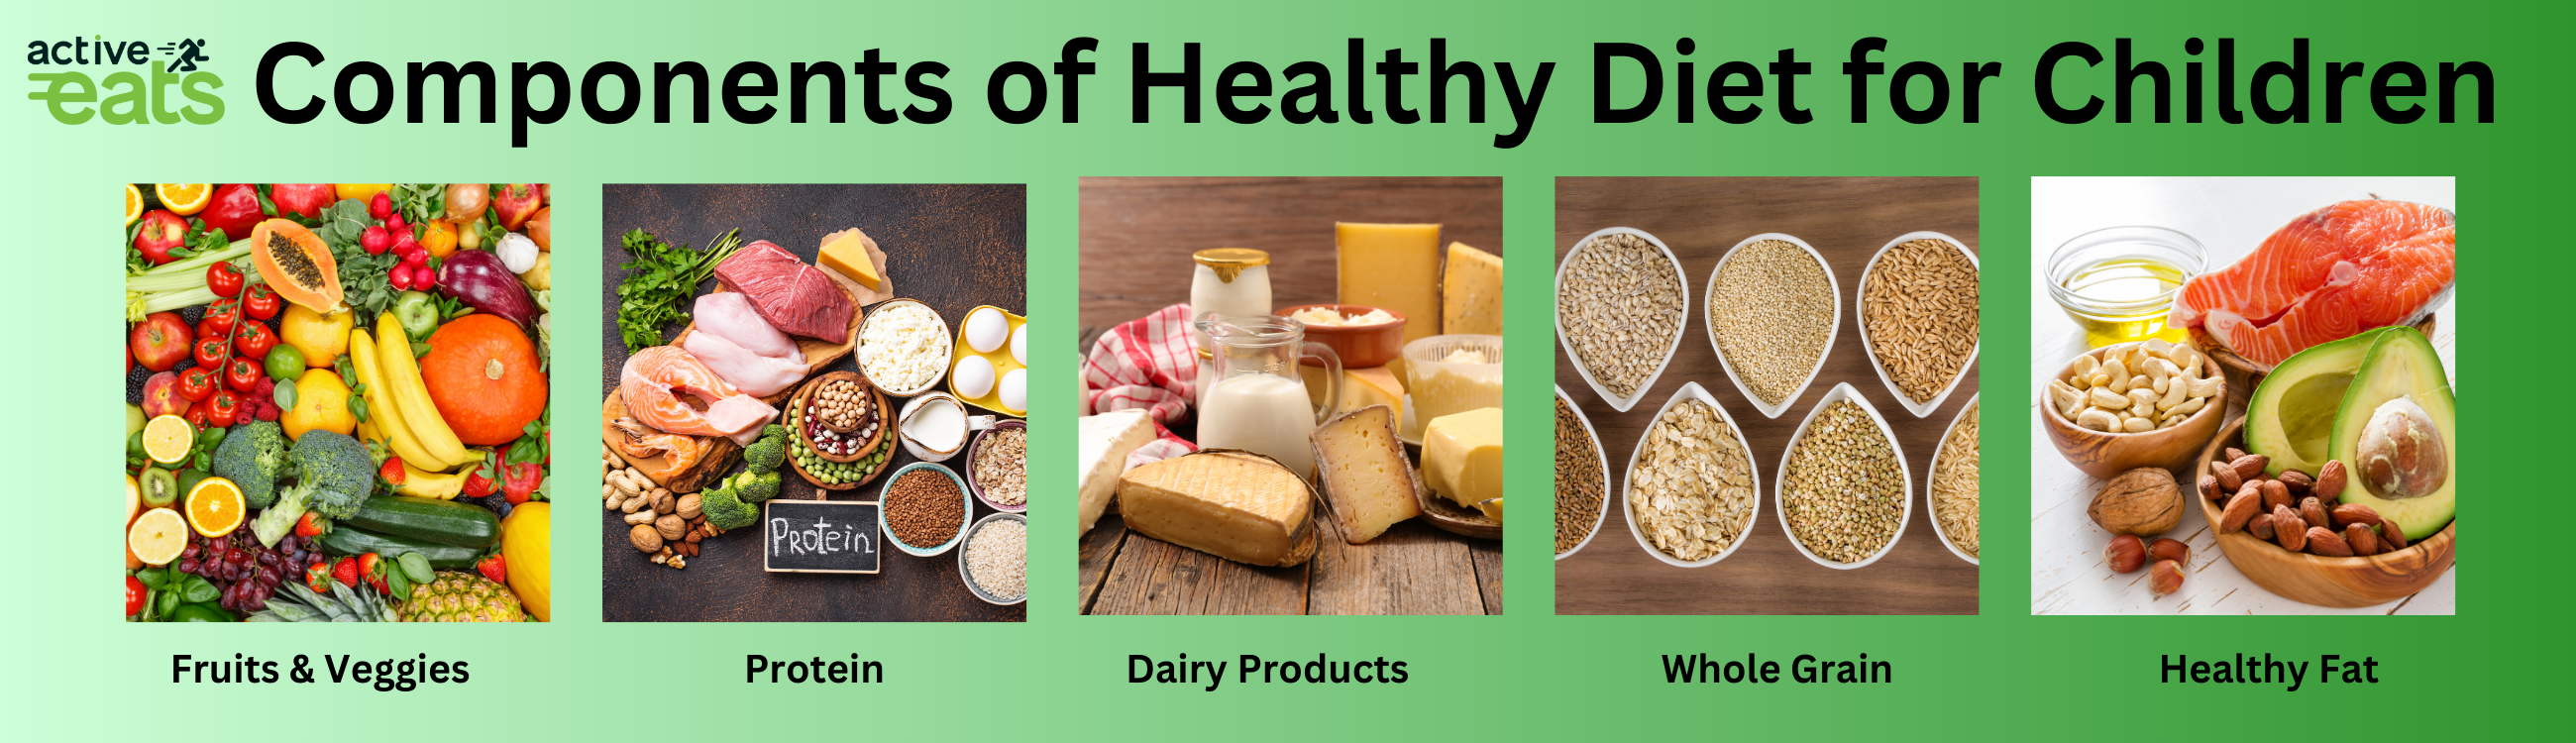 Image shows components of a healthy diet for children which includes fruits and veggies, protein rich food items, dairy food items, whole grain foods and healthy fat food items.